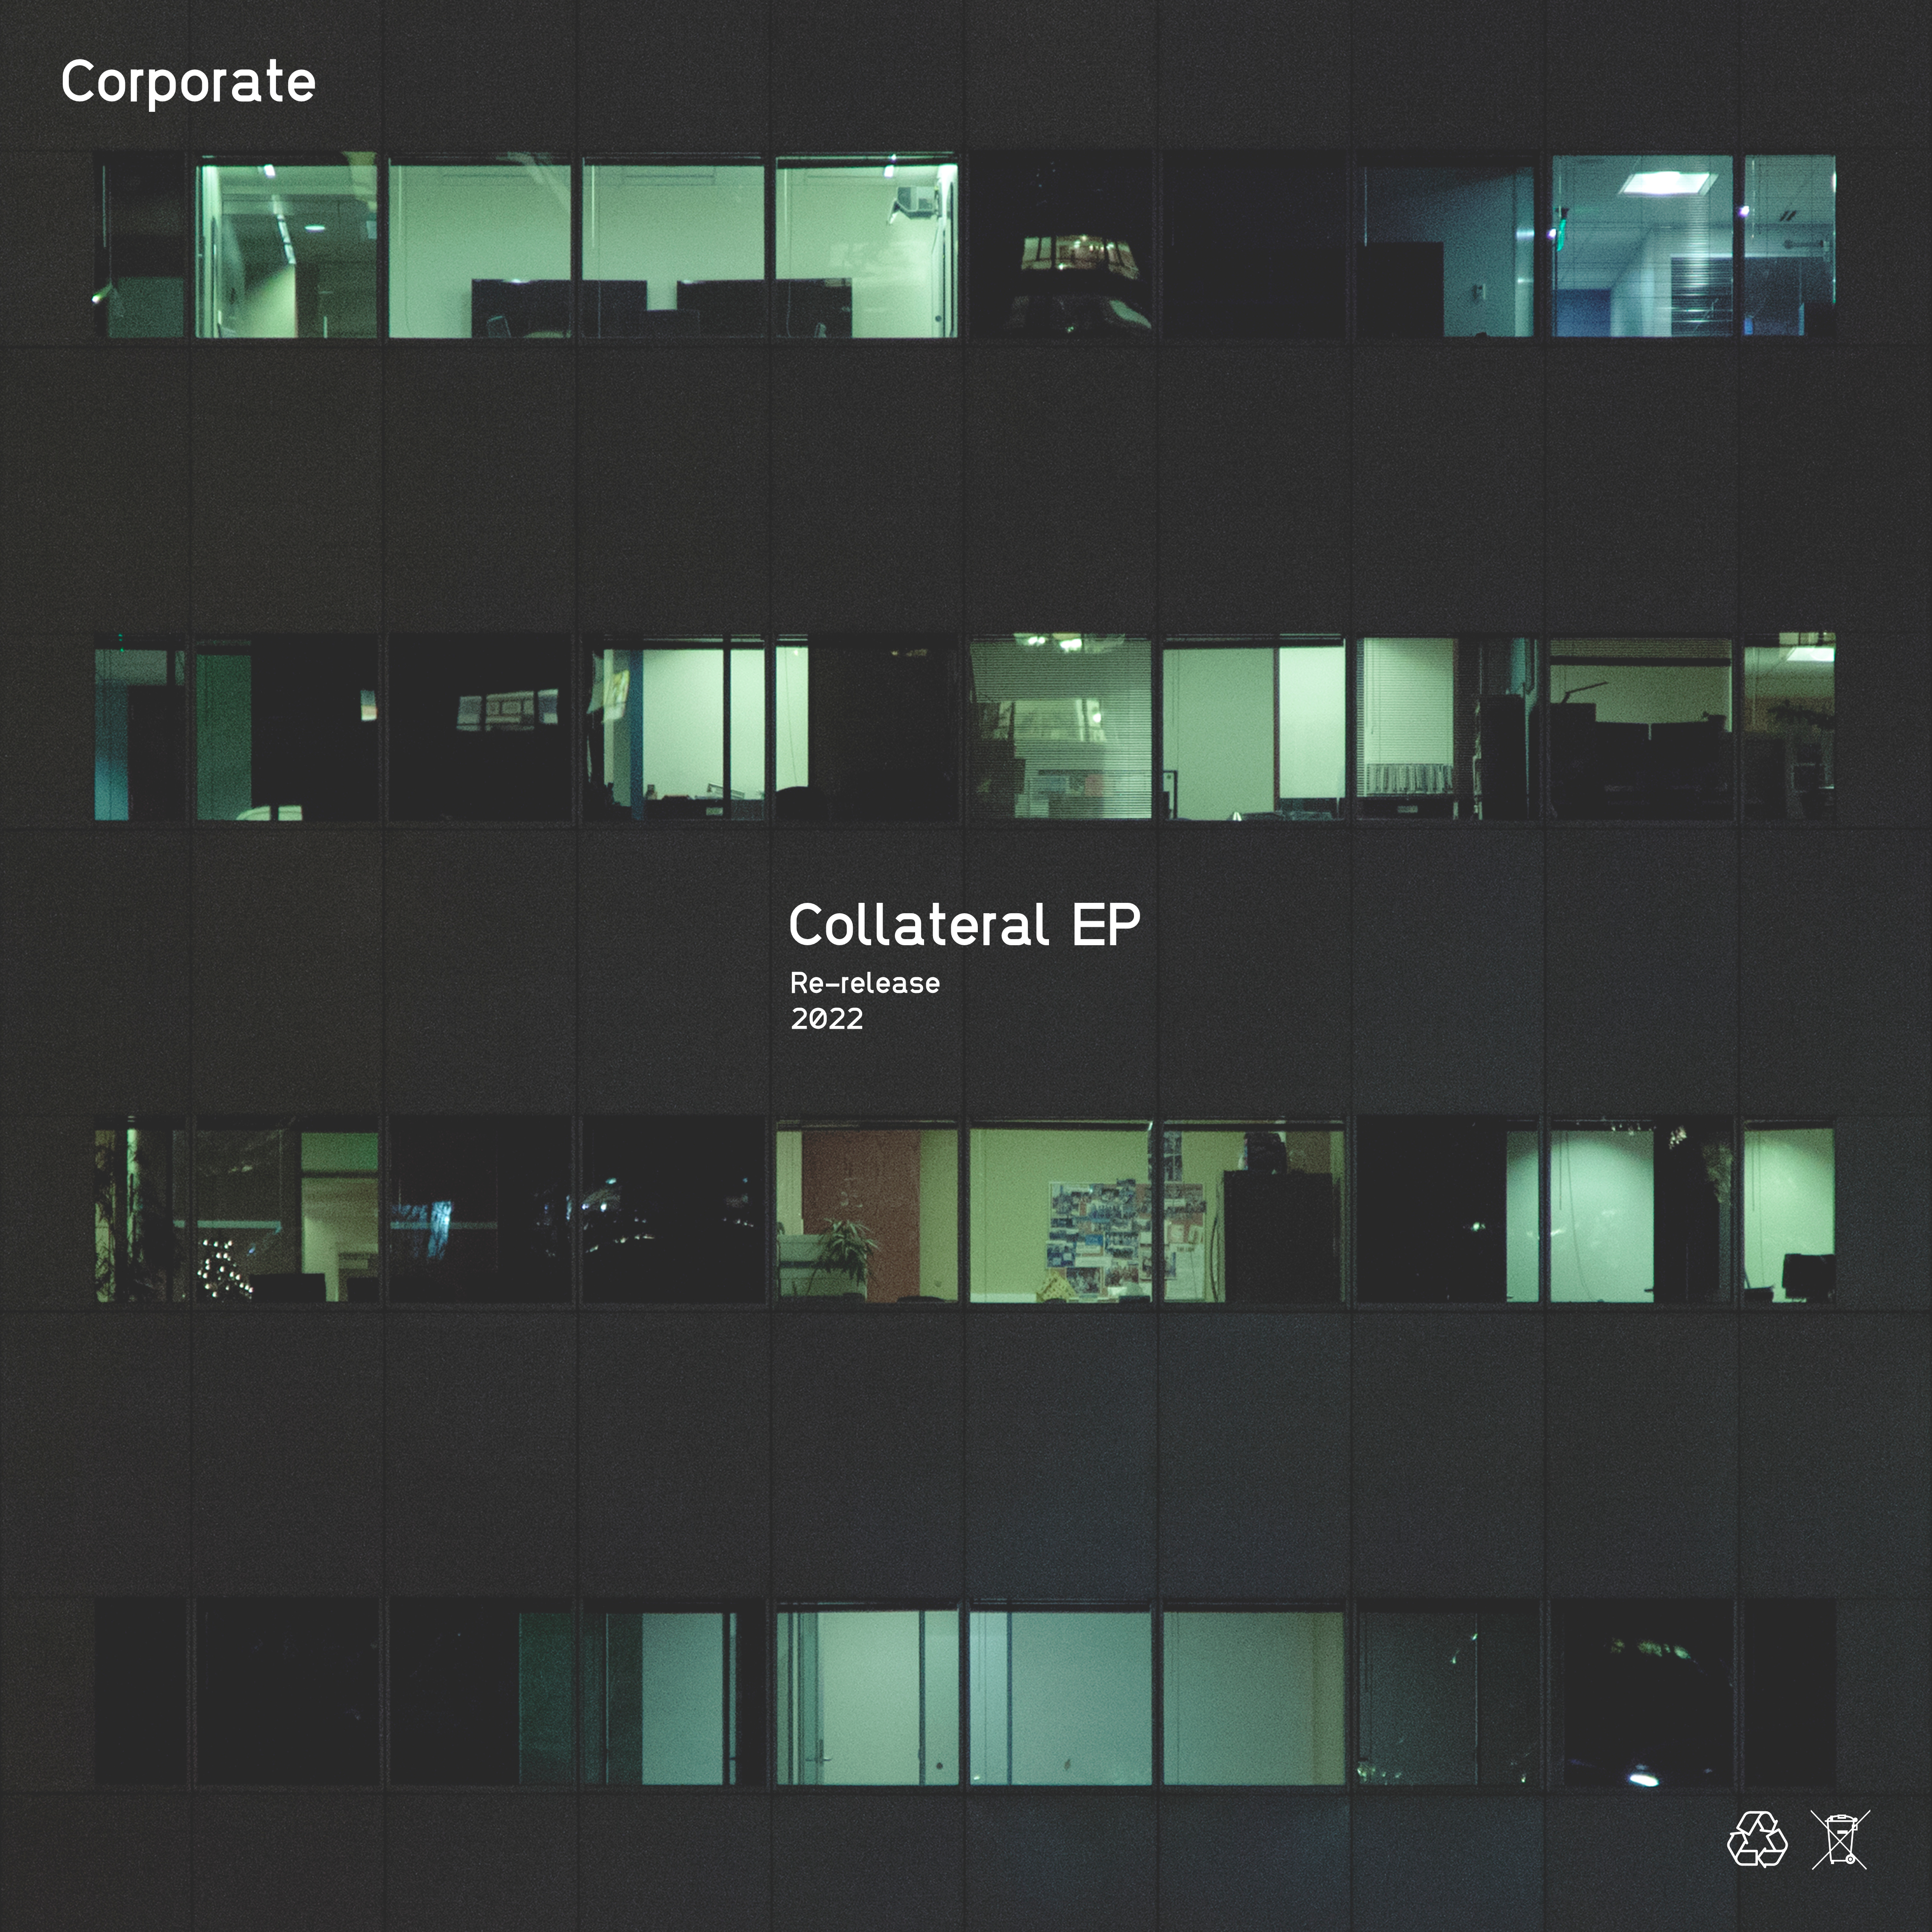 Collateral EP